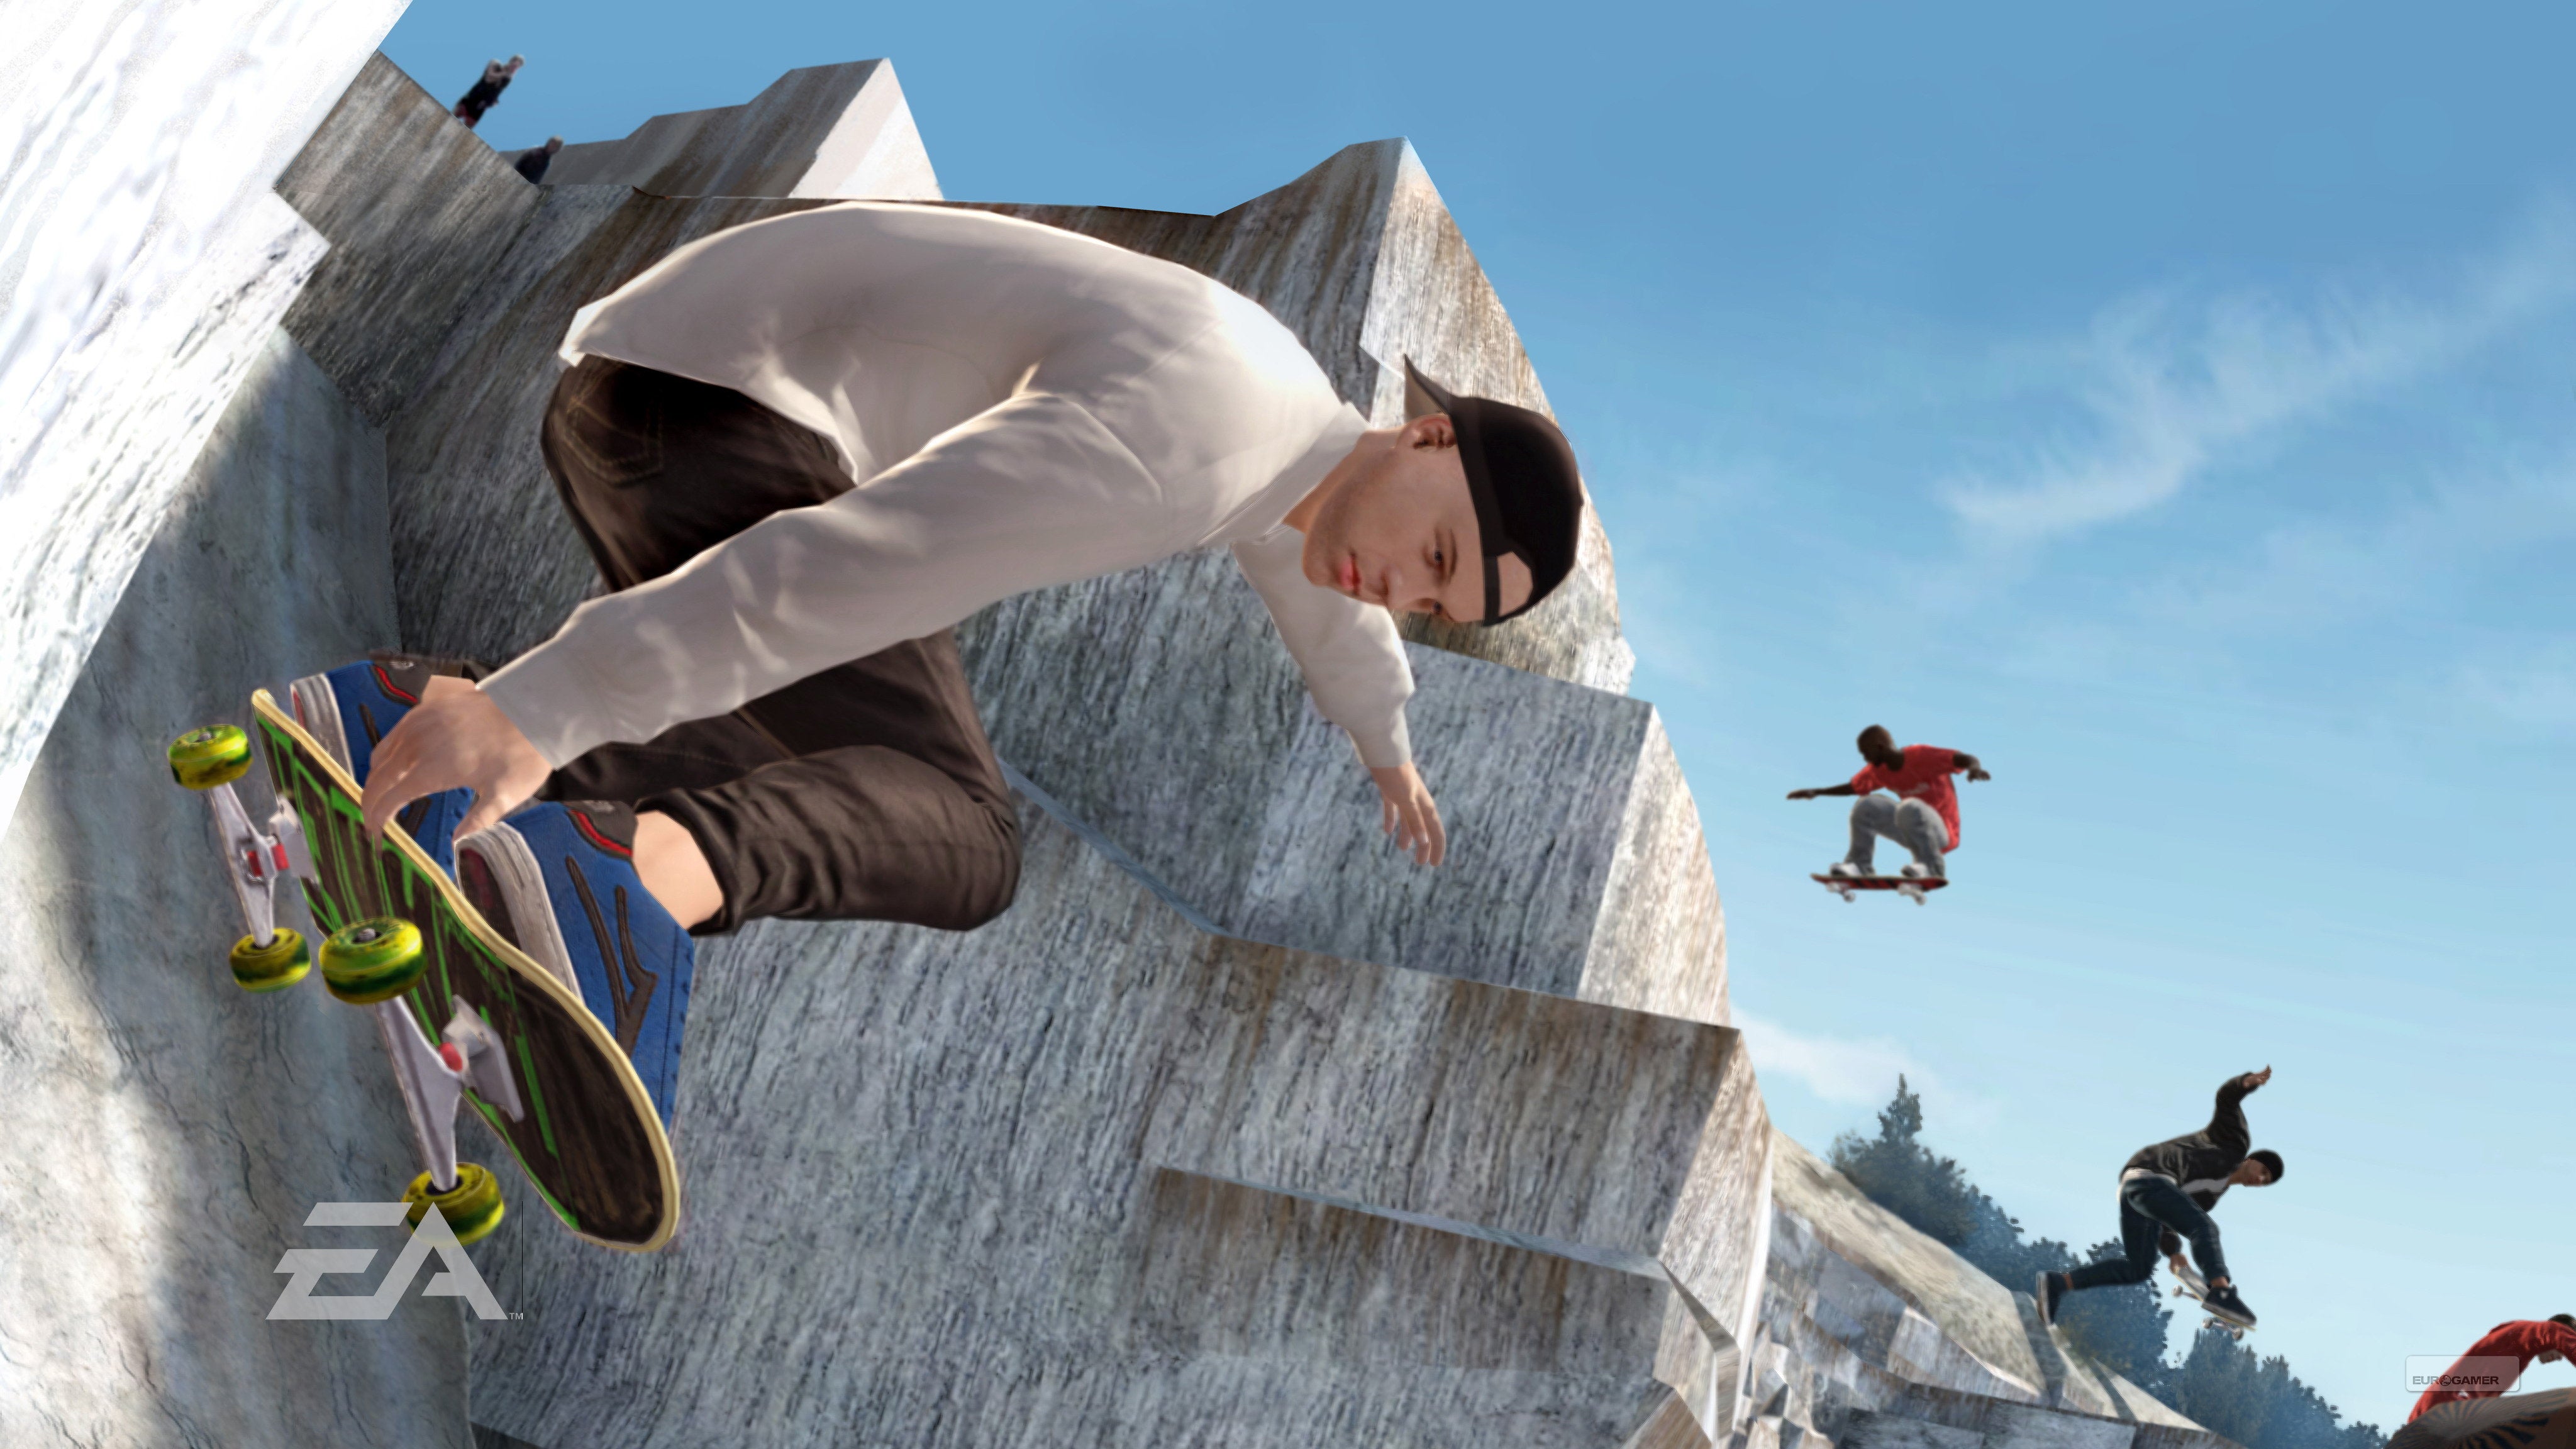 Image for EA rushes to pull leaked Skate 4 footage